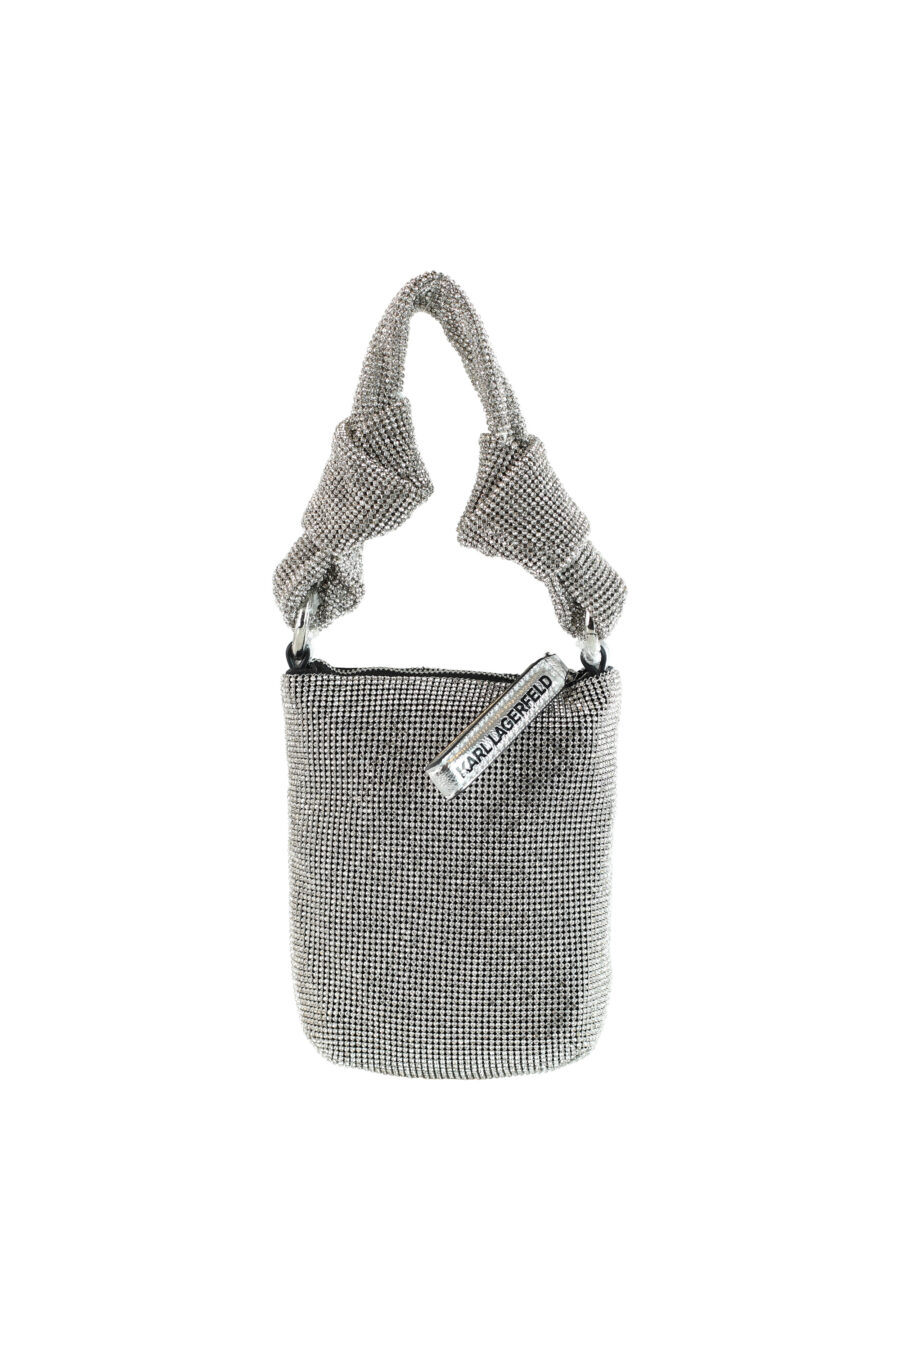 Silver mesh bag with rhinestones knotted with logo - 8720744103530